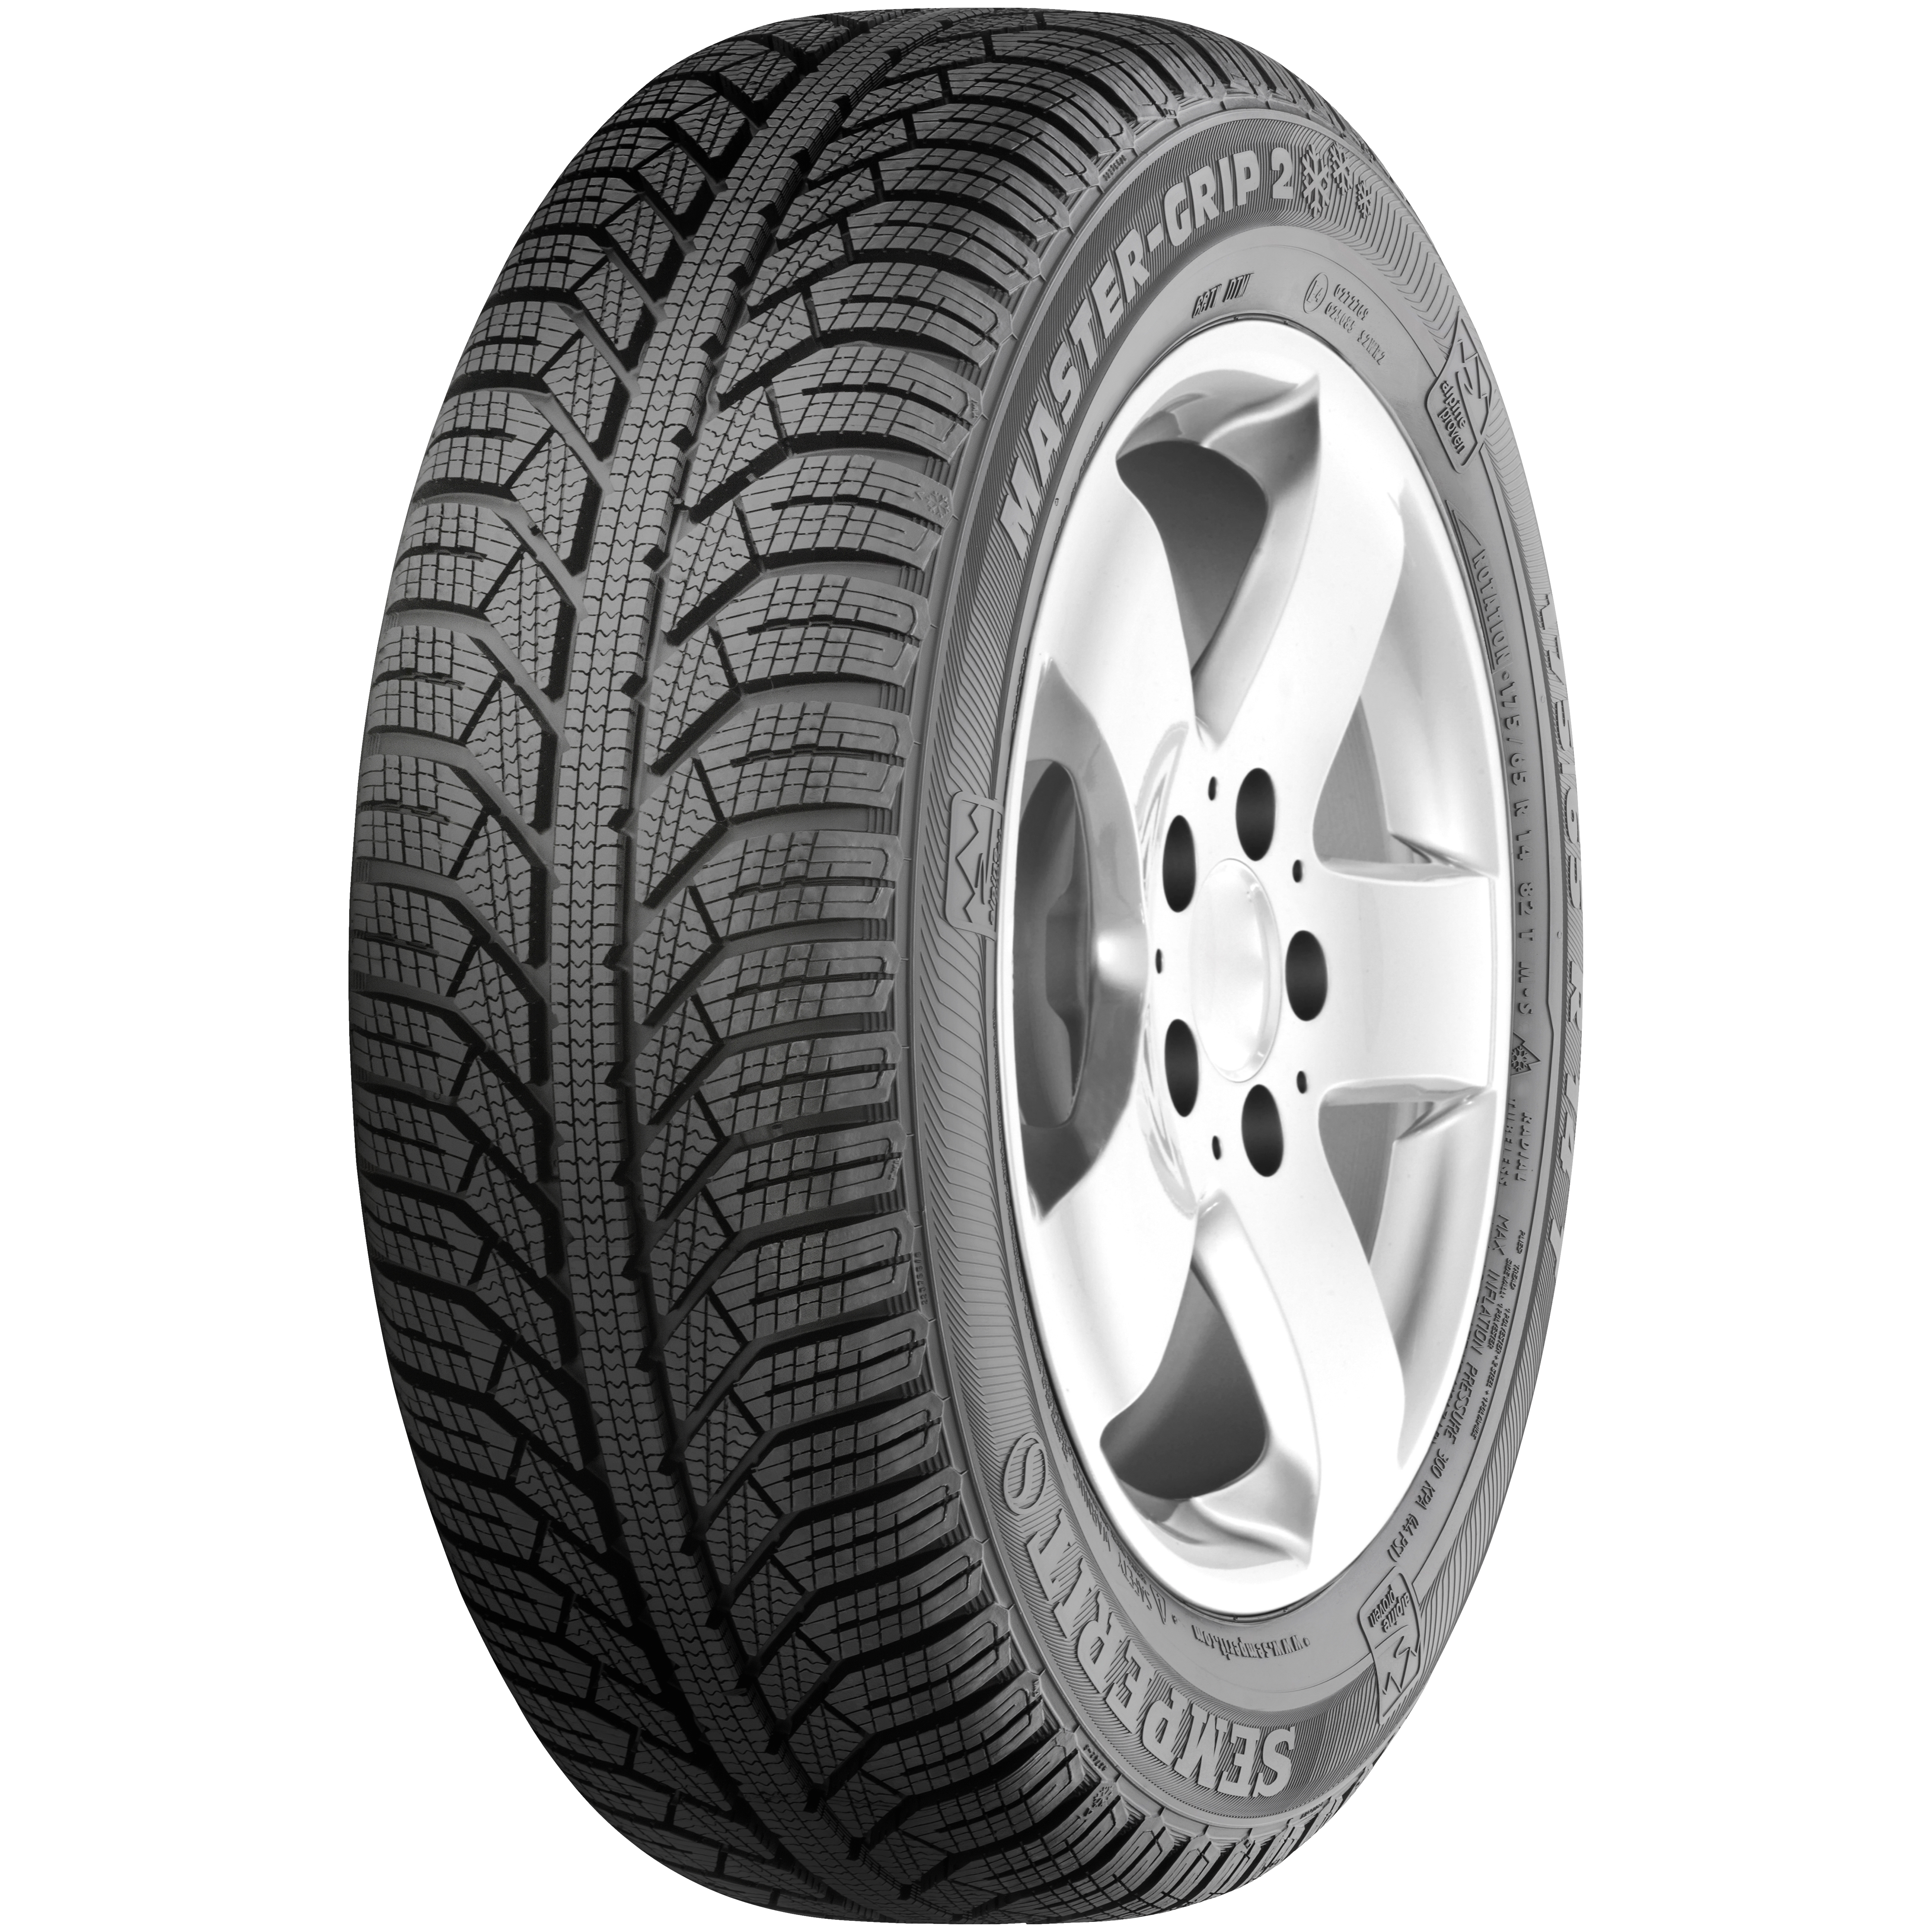 MASTER-GRIP 2 - with handling car excellent | winter Semperit tyre The for snow your